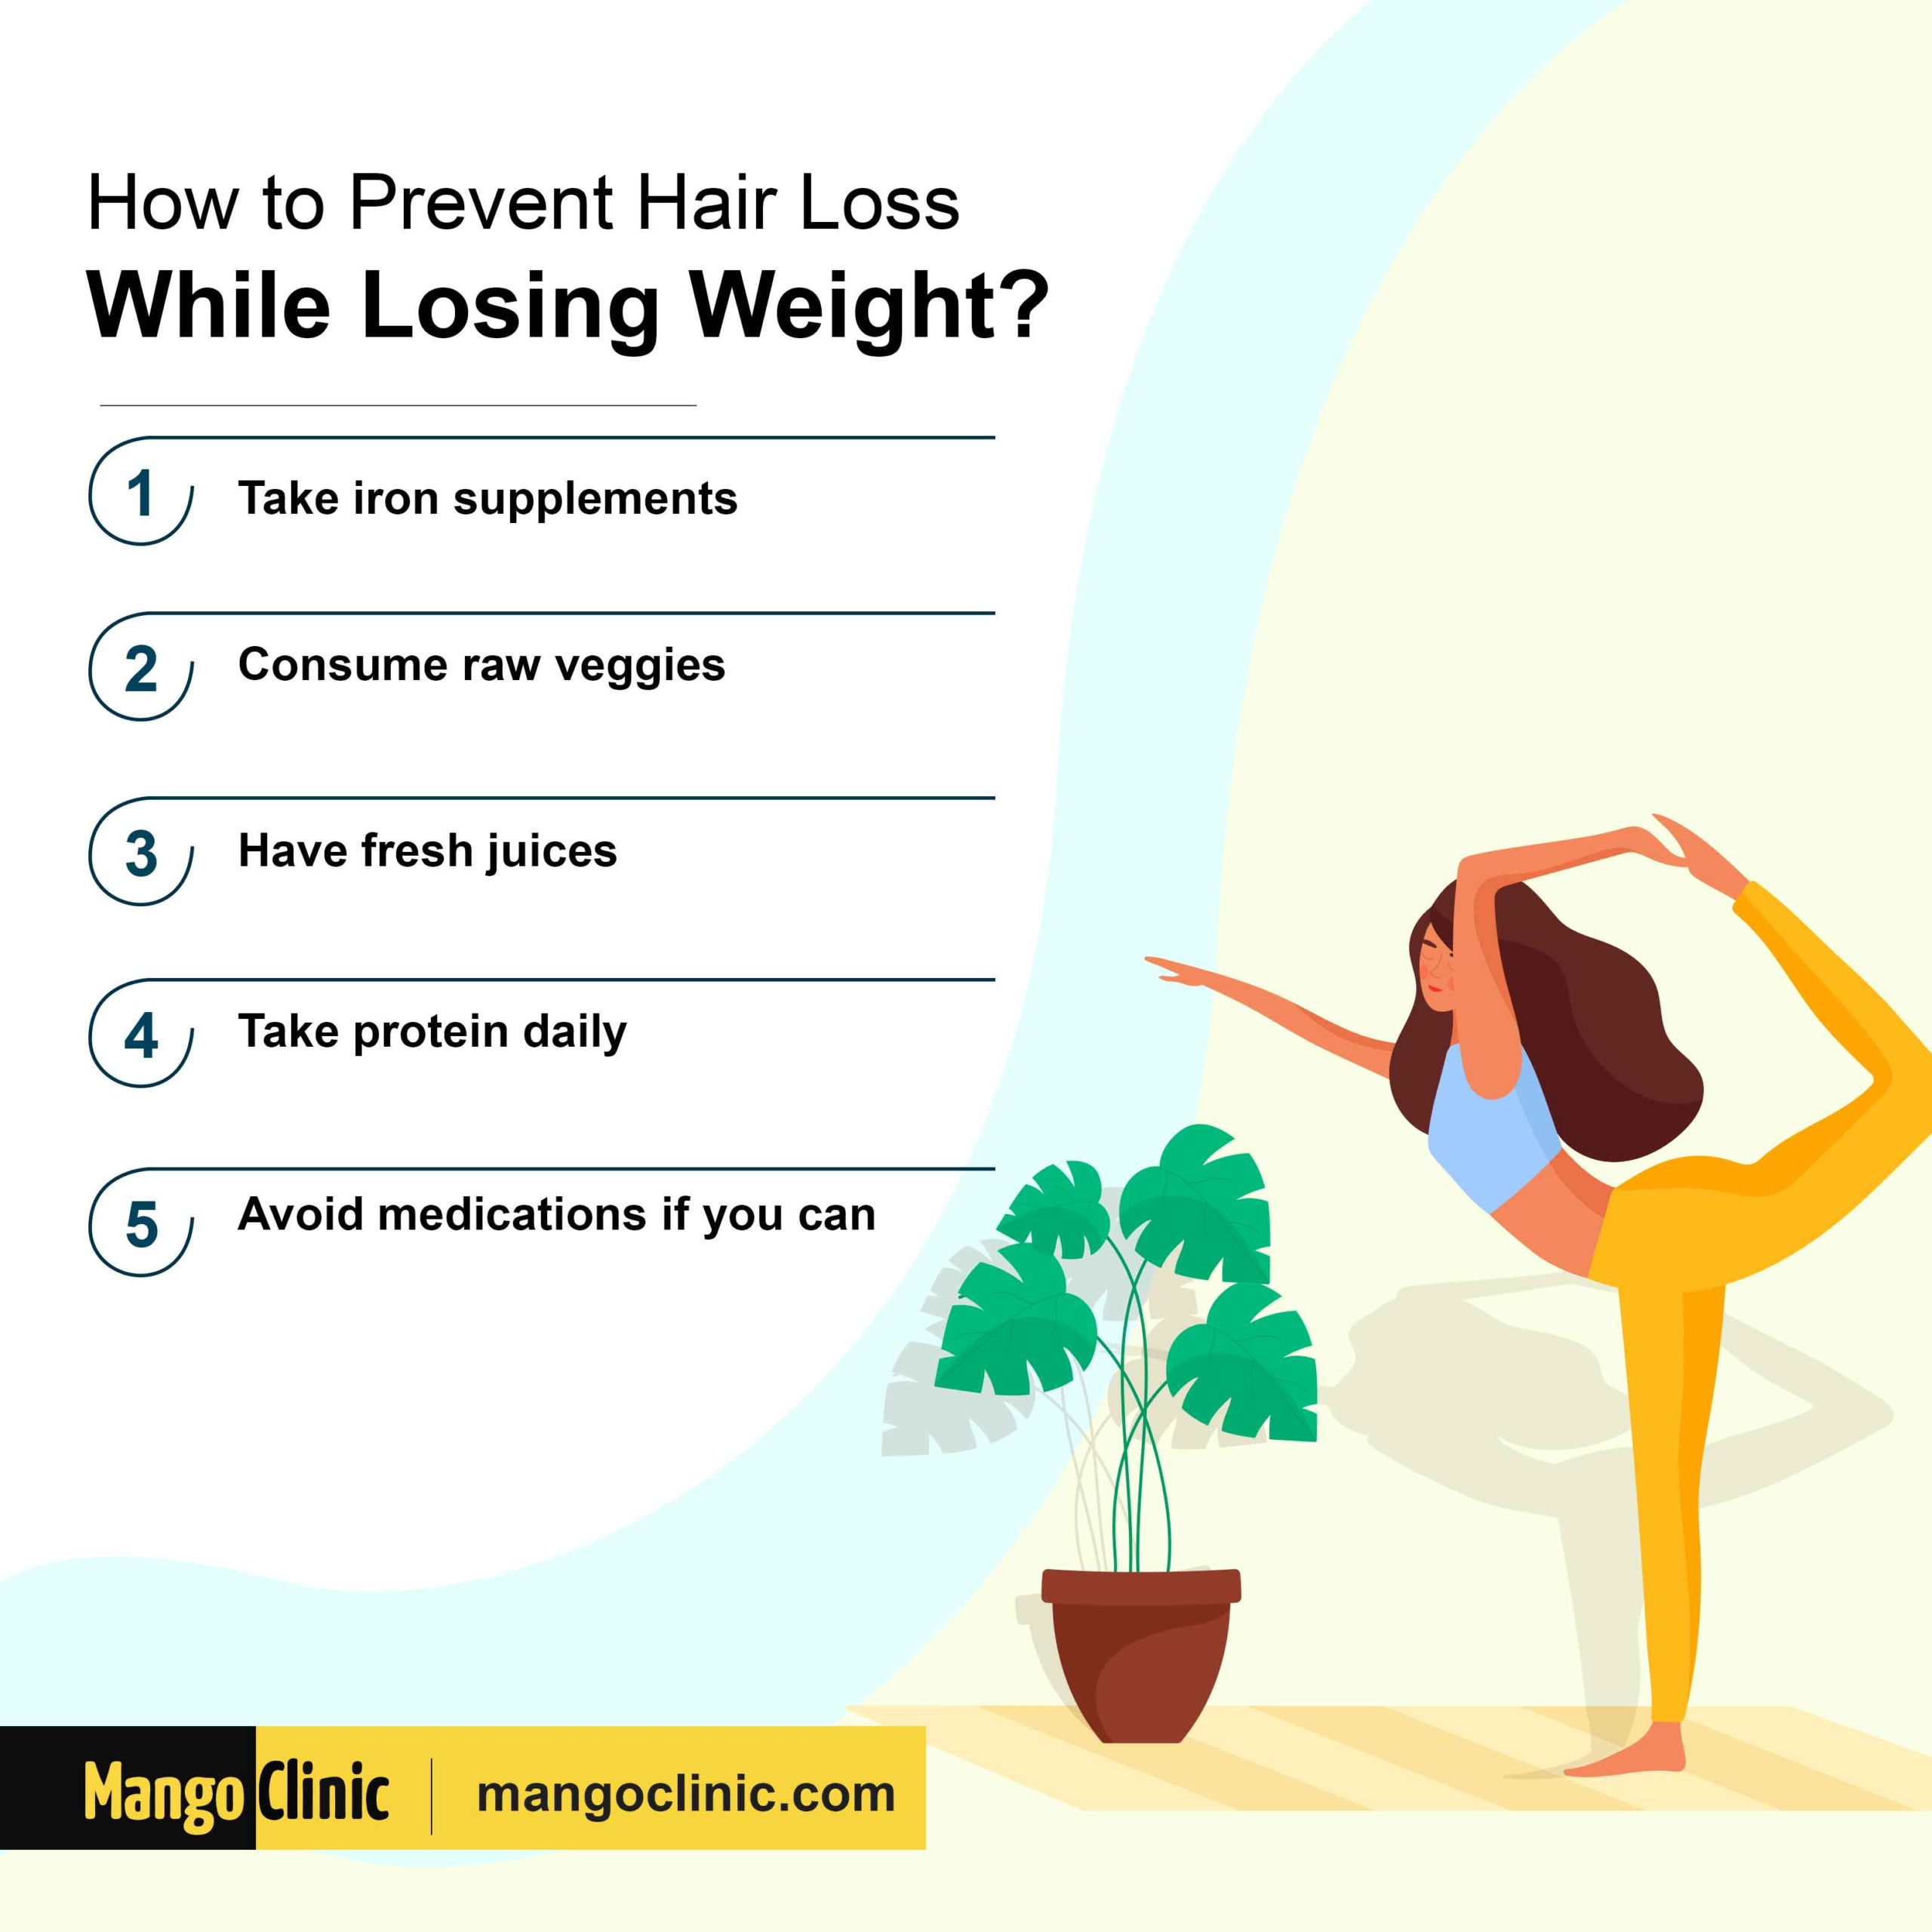 Prevent hair loss while losing weight